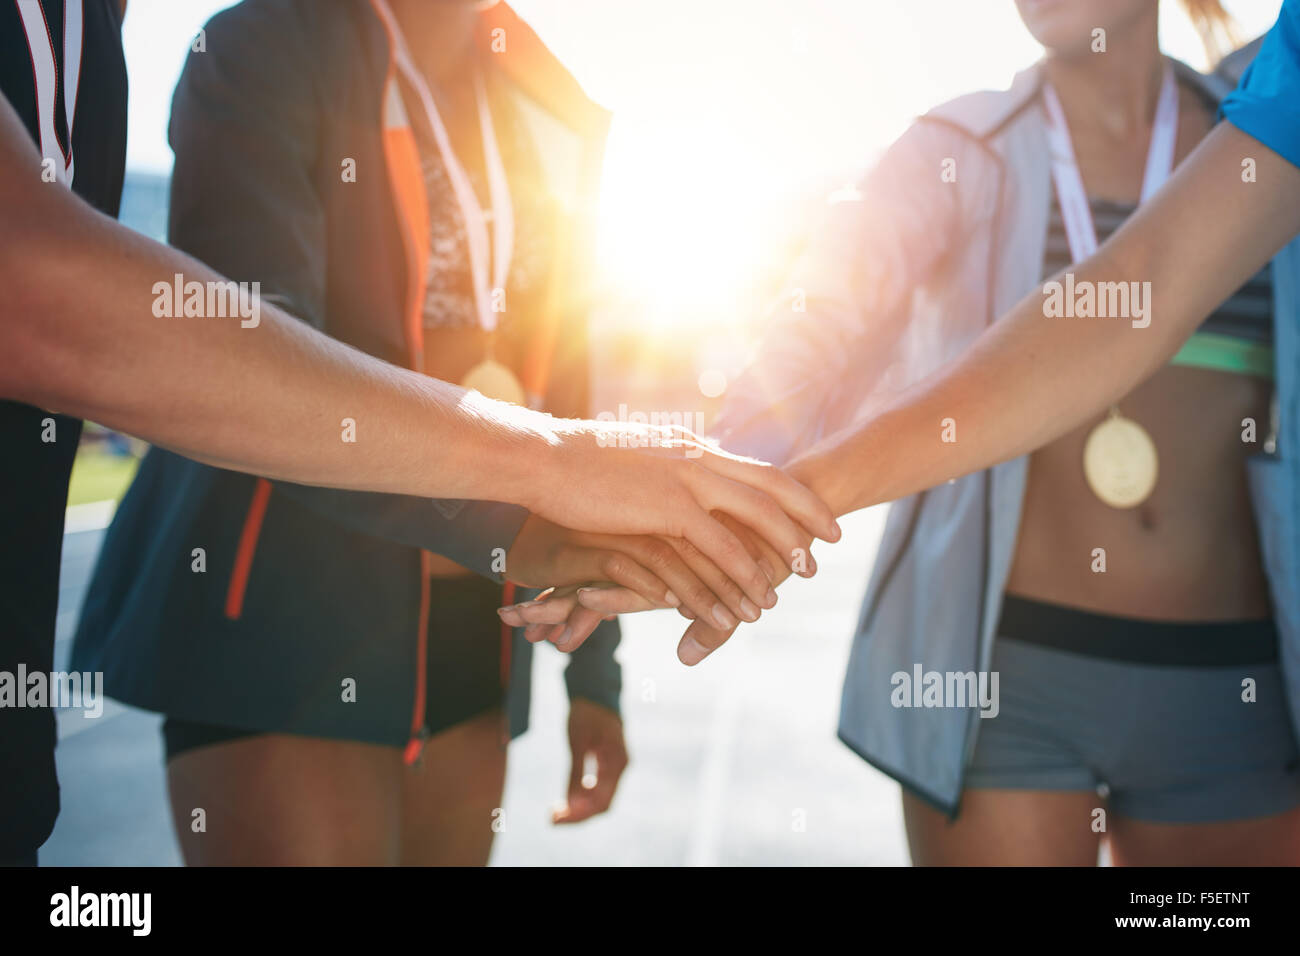 Sports people with hands together in huddle. Team with hands together celebrating success after winning athletics competition. Stock Photo